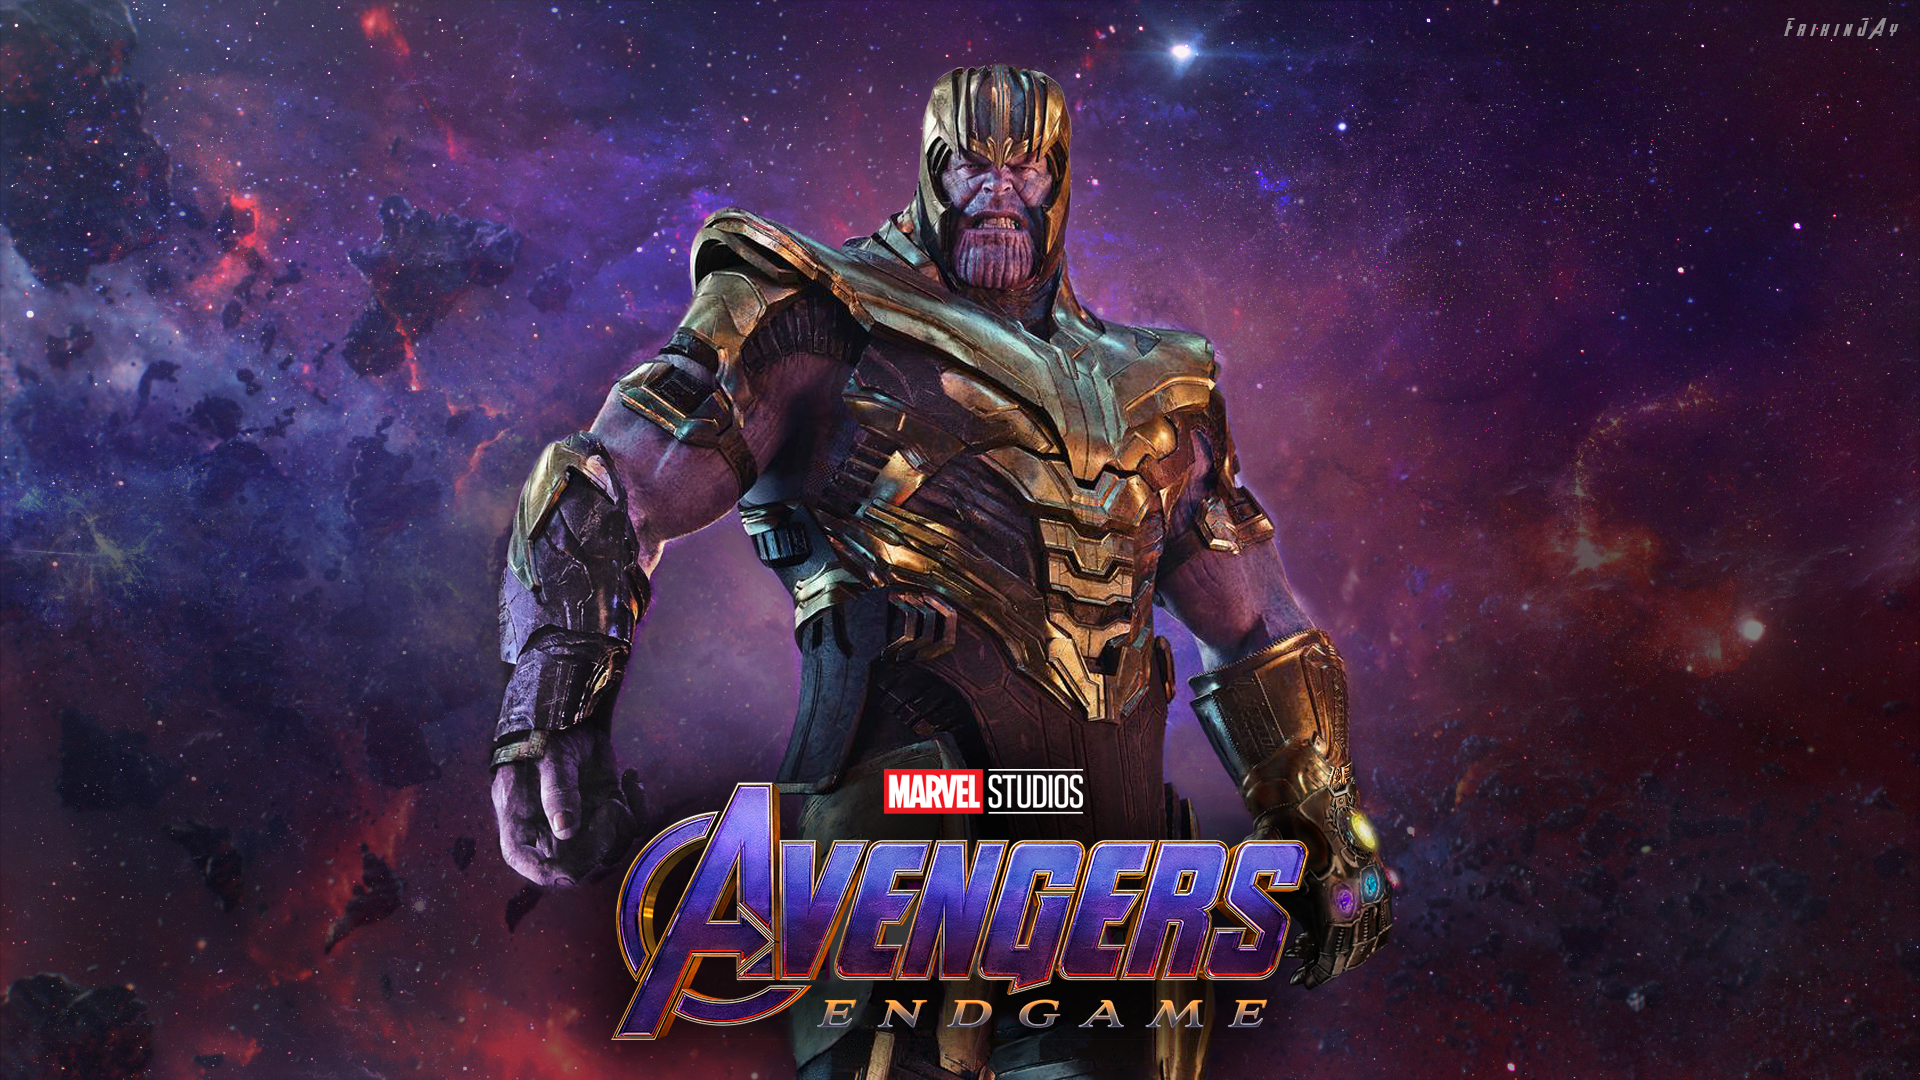 As Requested Endgame Thanos Wallpaper Need More Let Me Know In